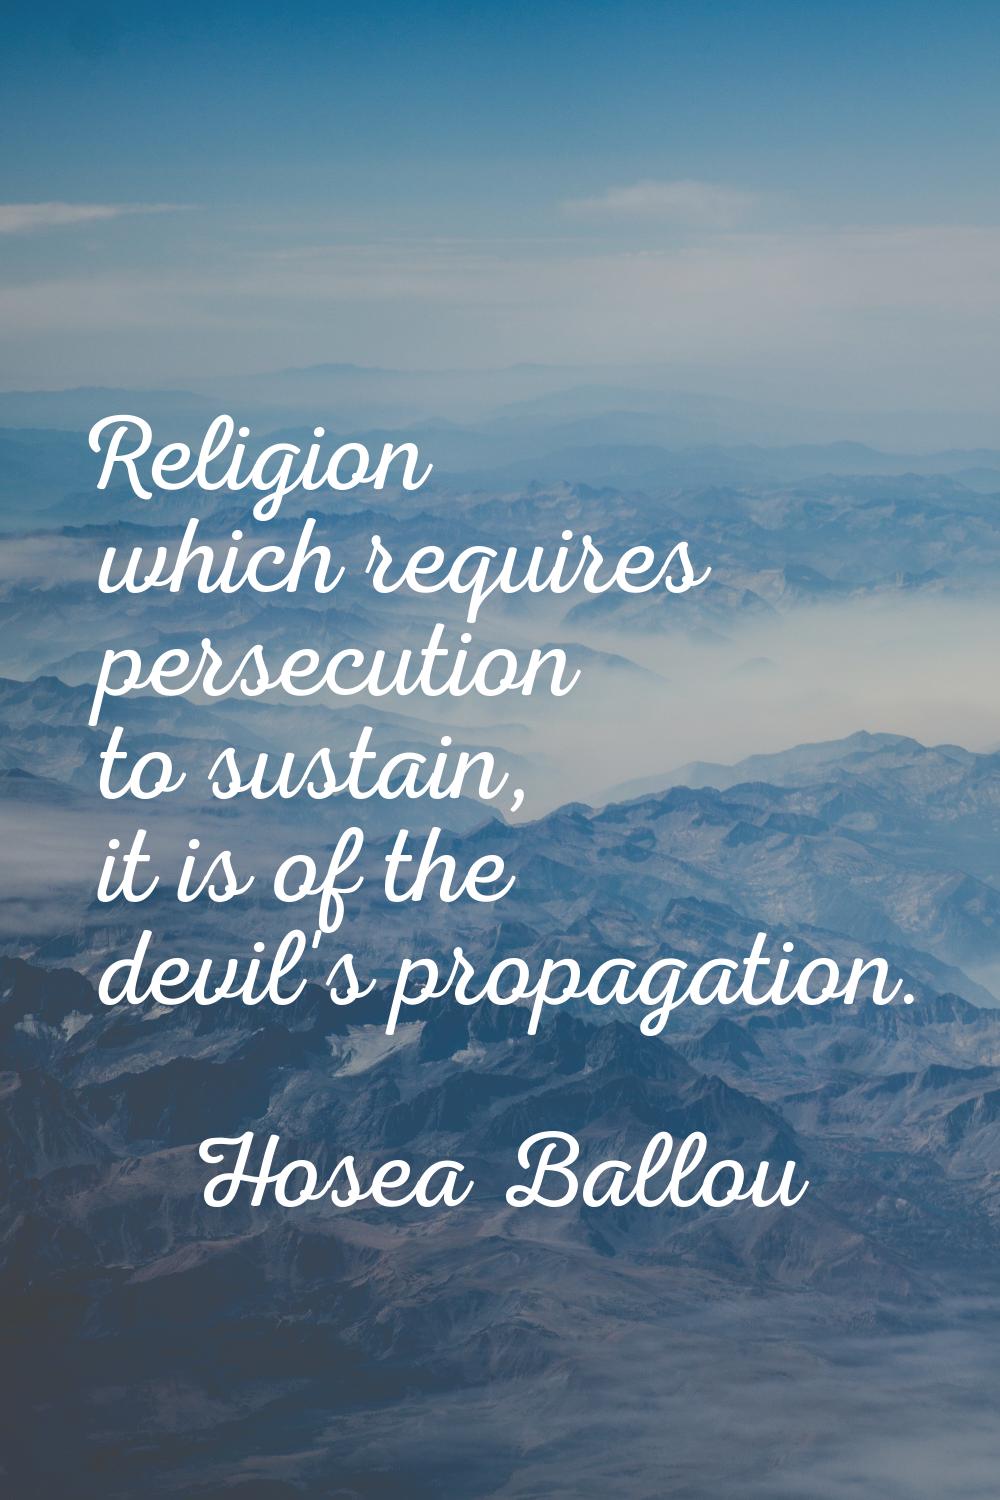 Religion which requires persecution to sustain, it is of the devil's propagation.